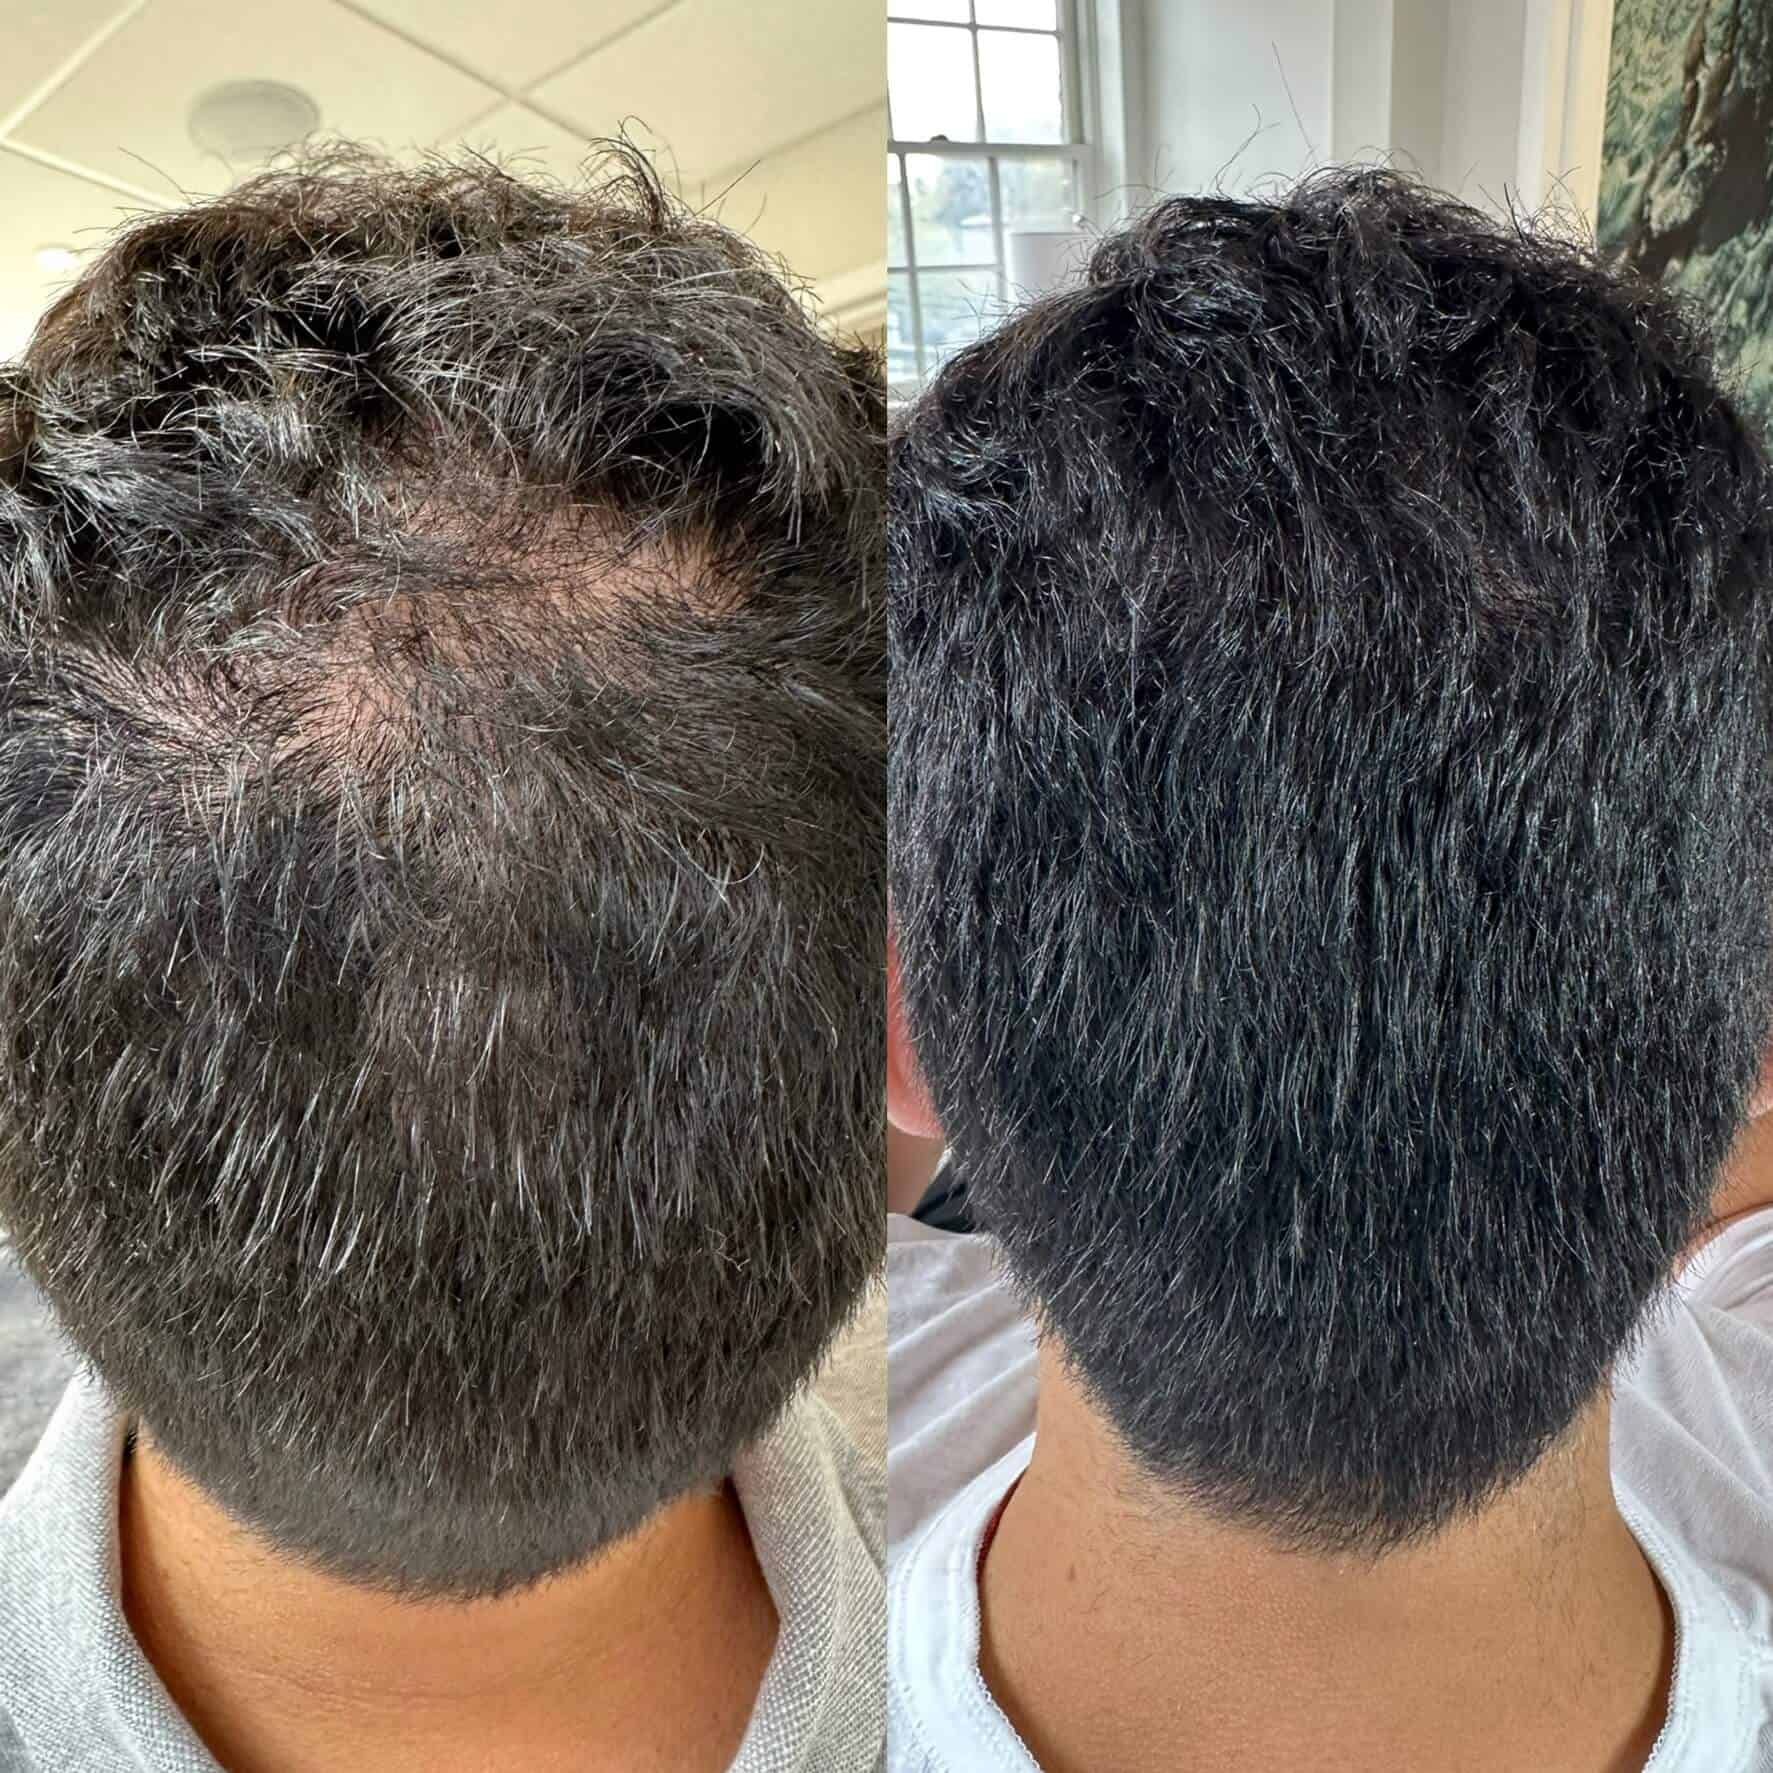 Man Before and After Hair Treatment photos | The Cosmetic Clinic in Greenwich, CT